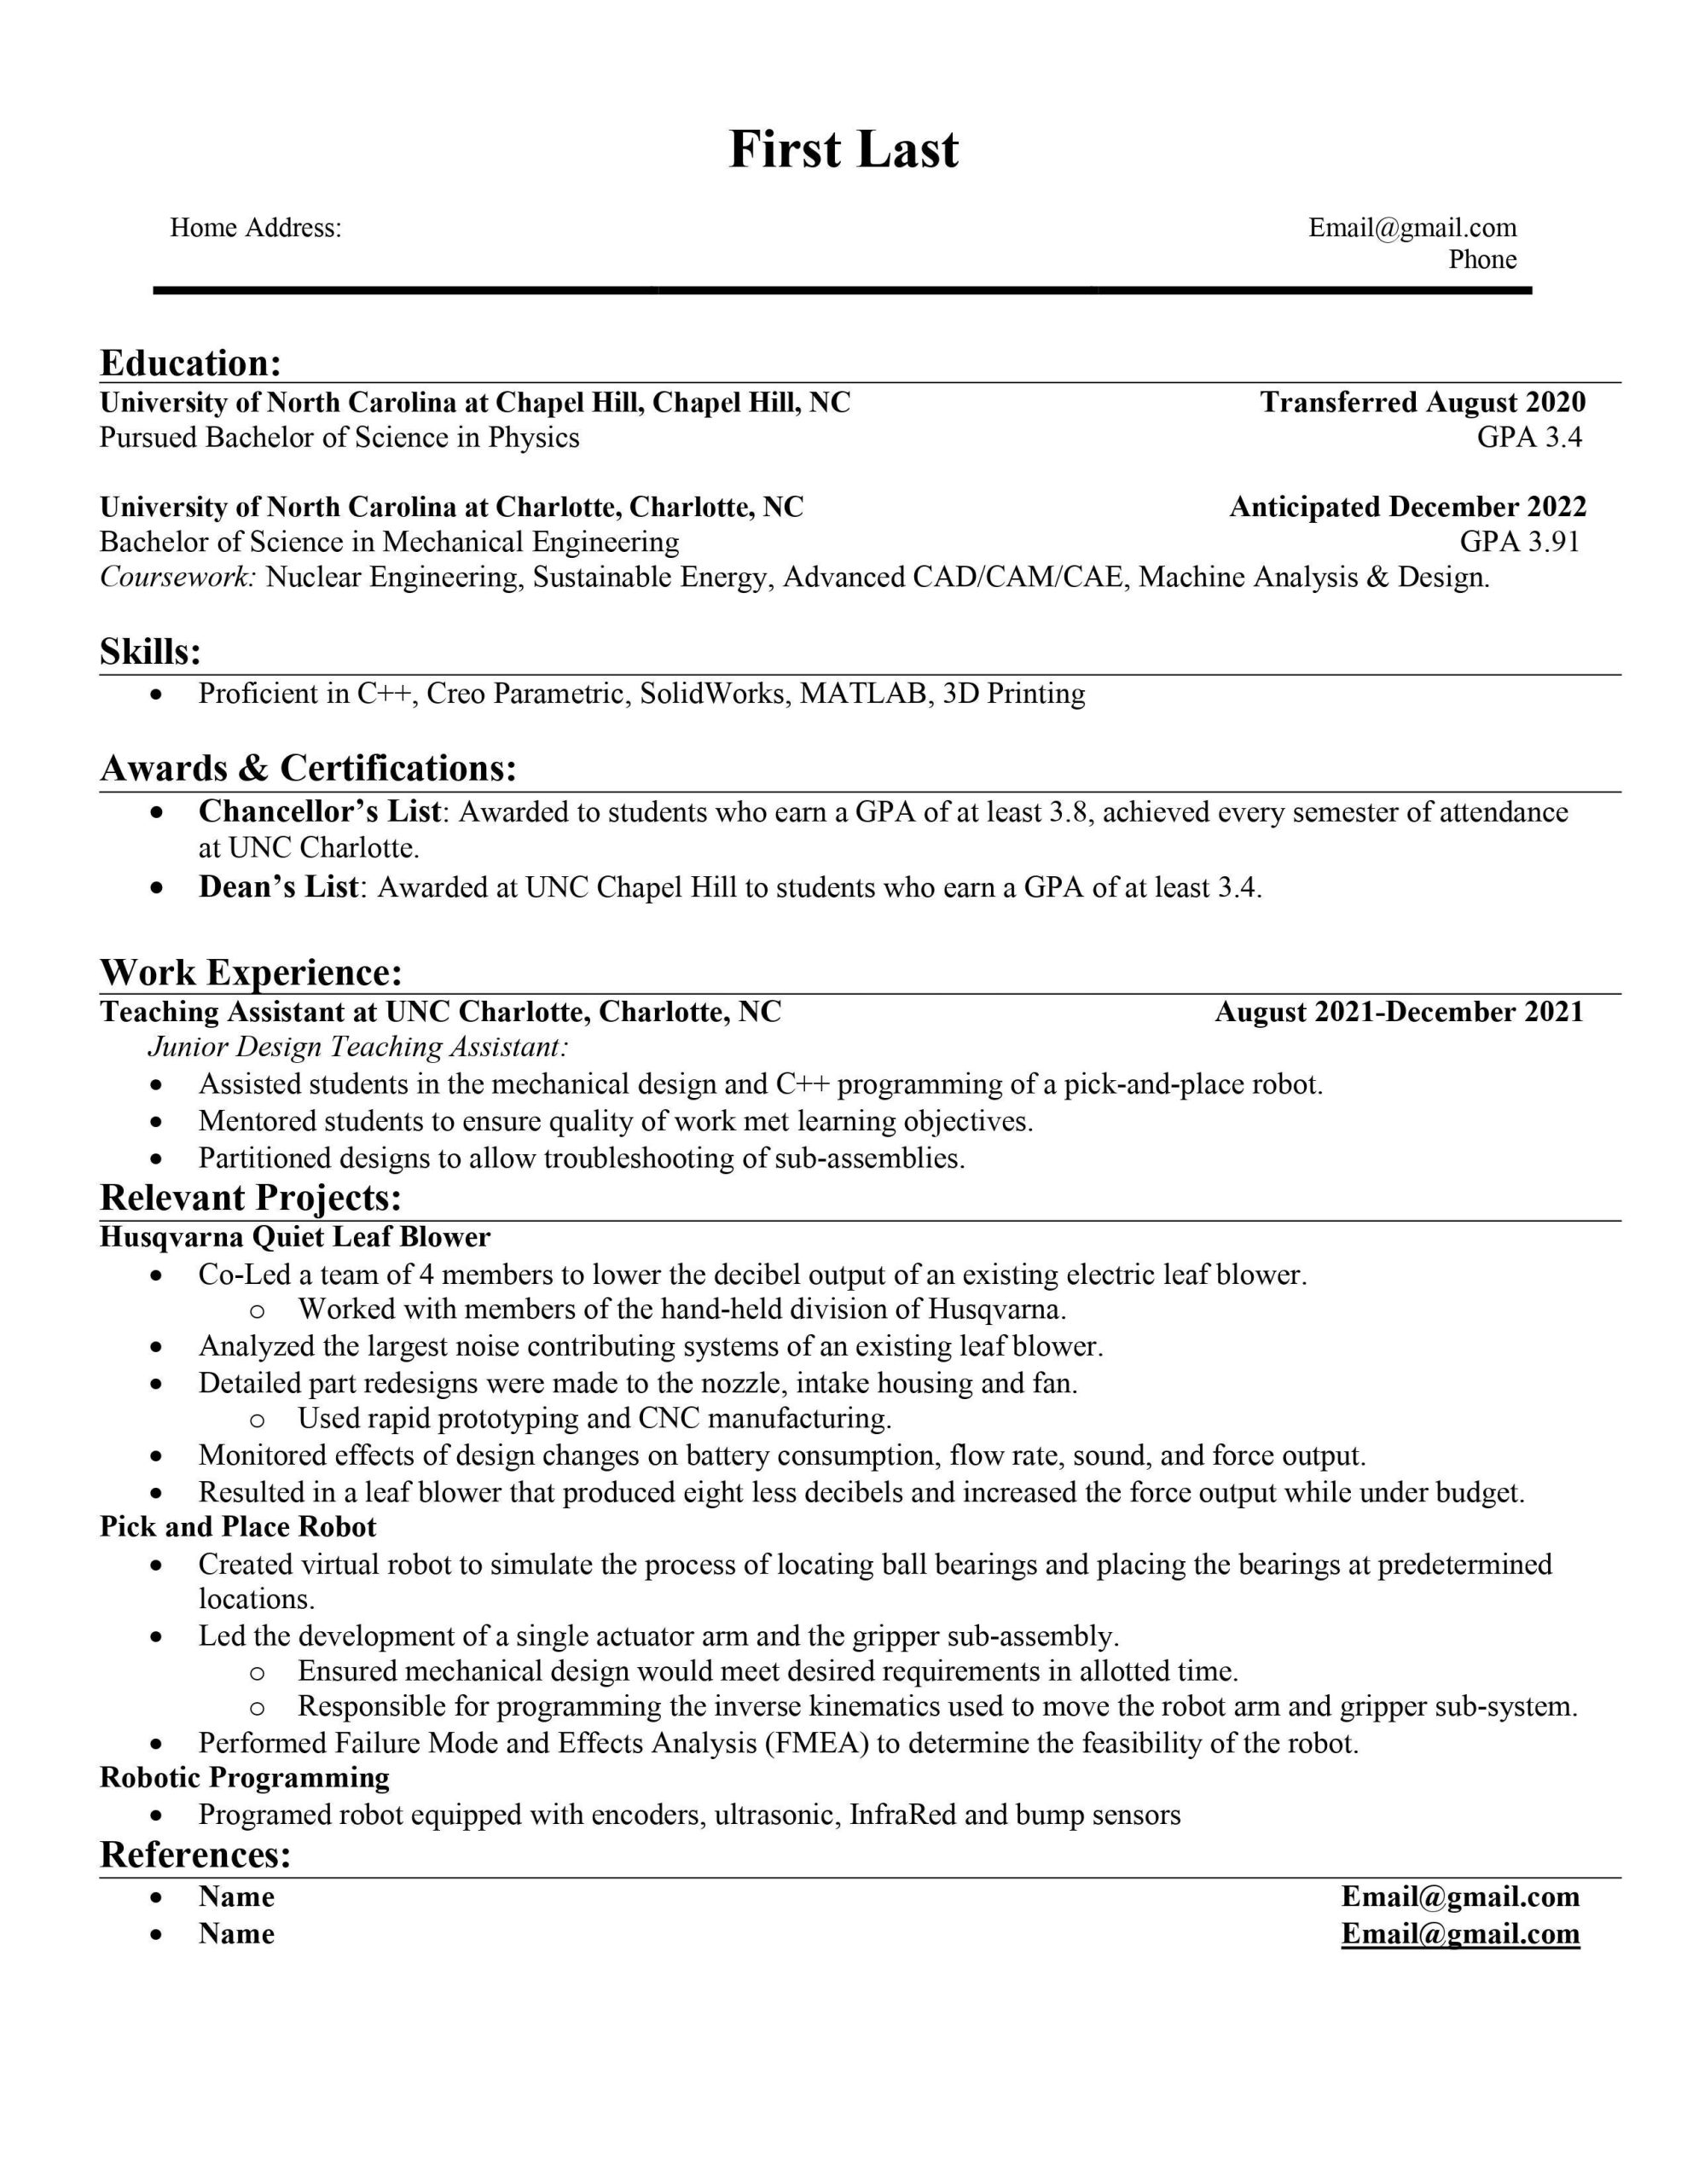 Sample Resume with Anticipated Graduation Date Me Expected Graduation In December 2022. Looking for Any Advice …